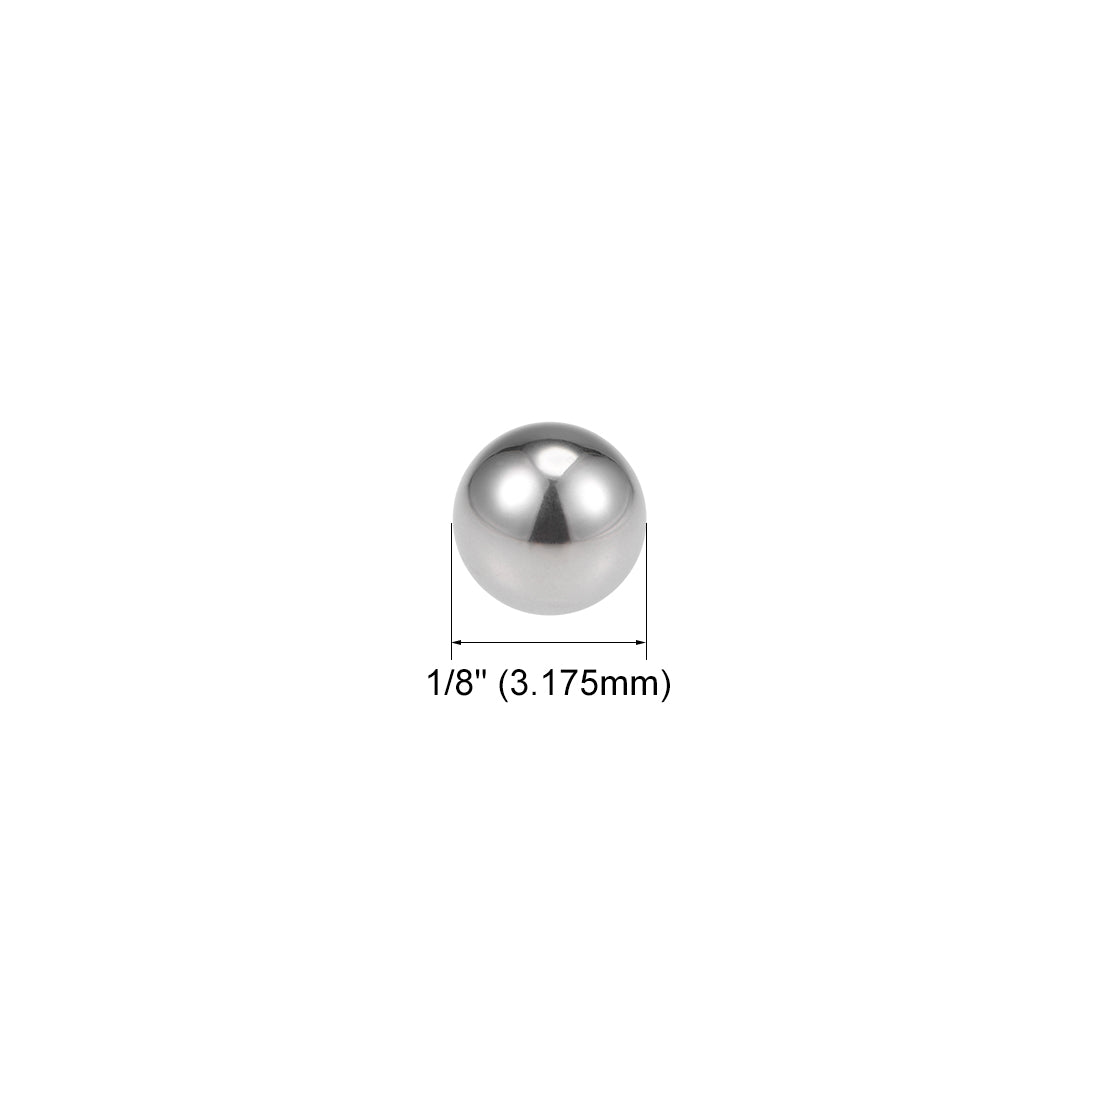 Uxcell Uxcell 7/32" Bearing Balls 440C Stainless Steel G25 Precision Balls 200pcs